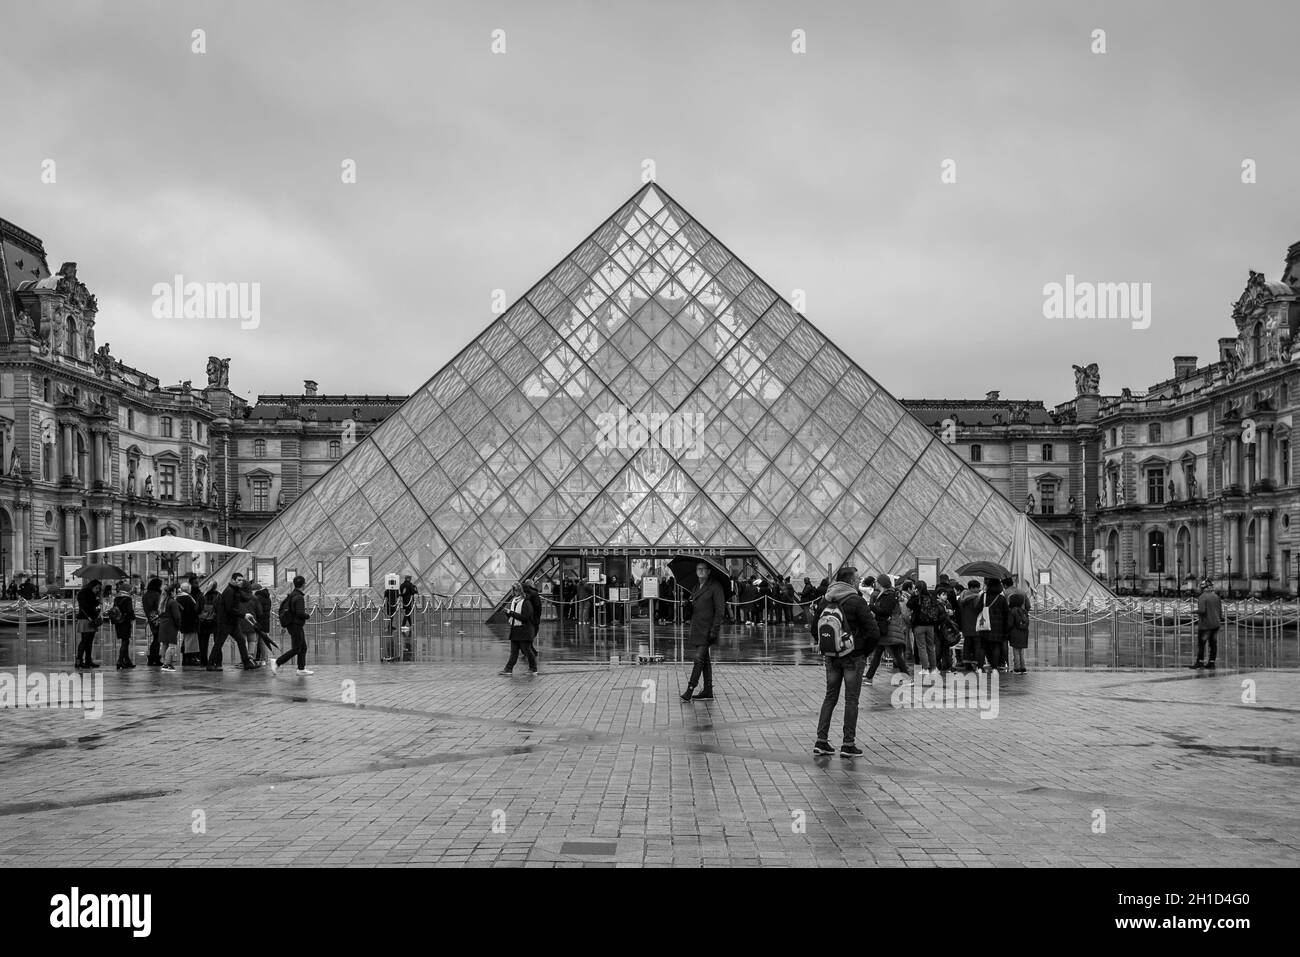 Paris, France - December 23, 2018: Louvre museum with glass pyramid in Paris, France. It is one of the top tourist attractions of Paris. Paris landmar Stock Photo